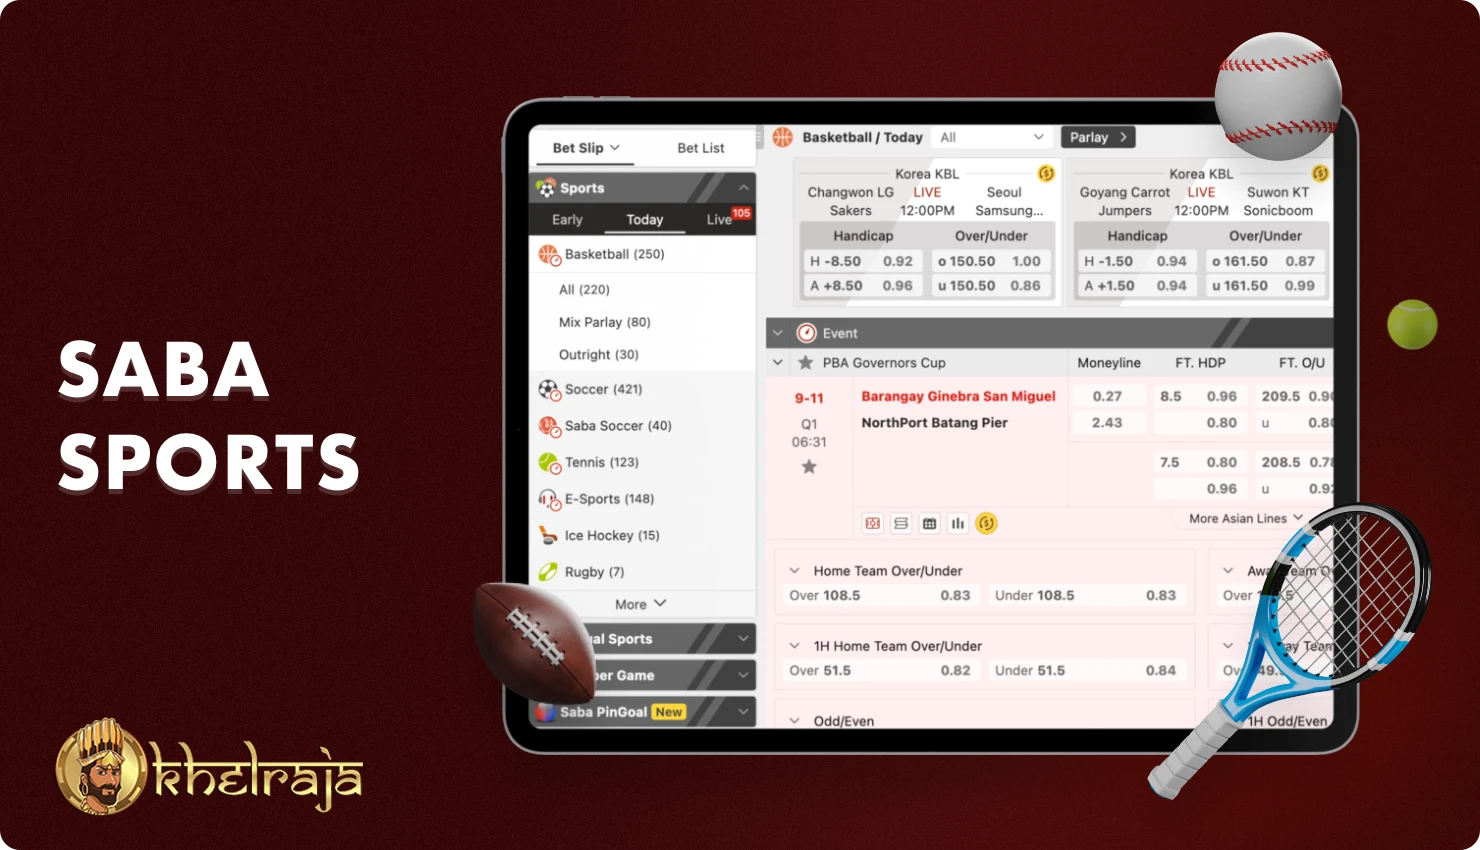 Saba Sports in Khelraja is chosen by users from India who bet on sports